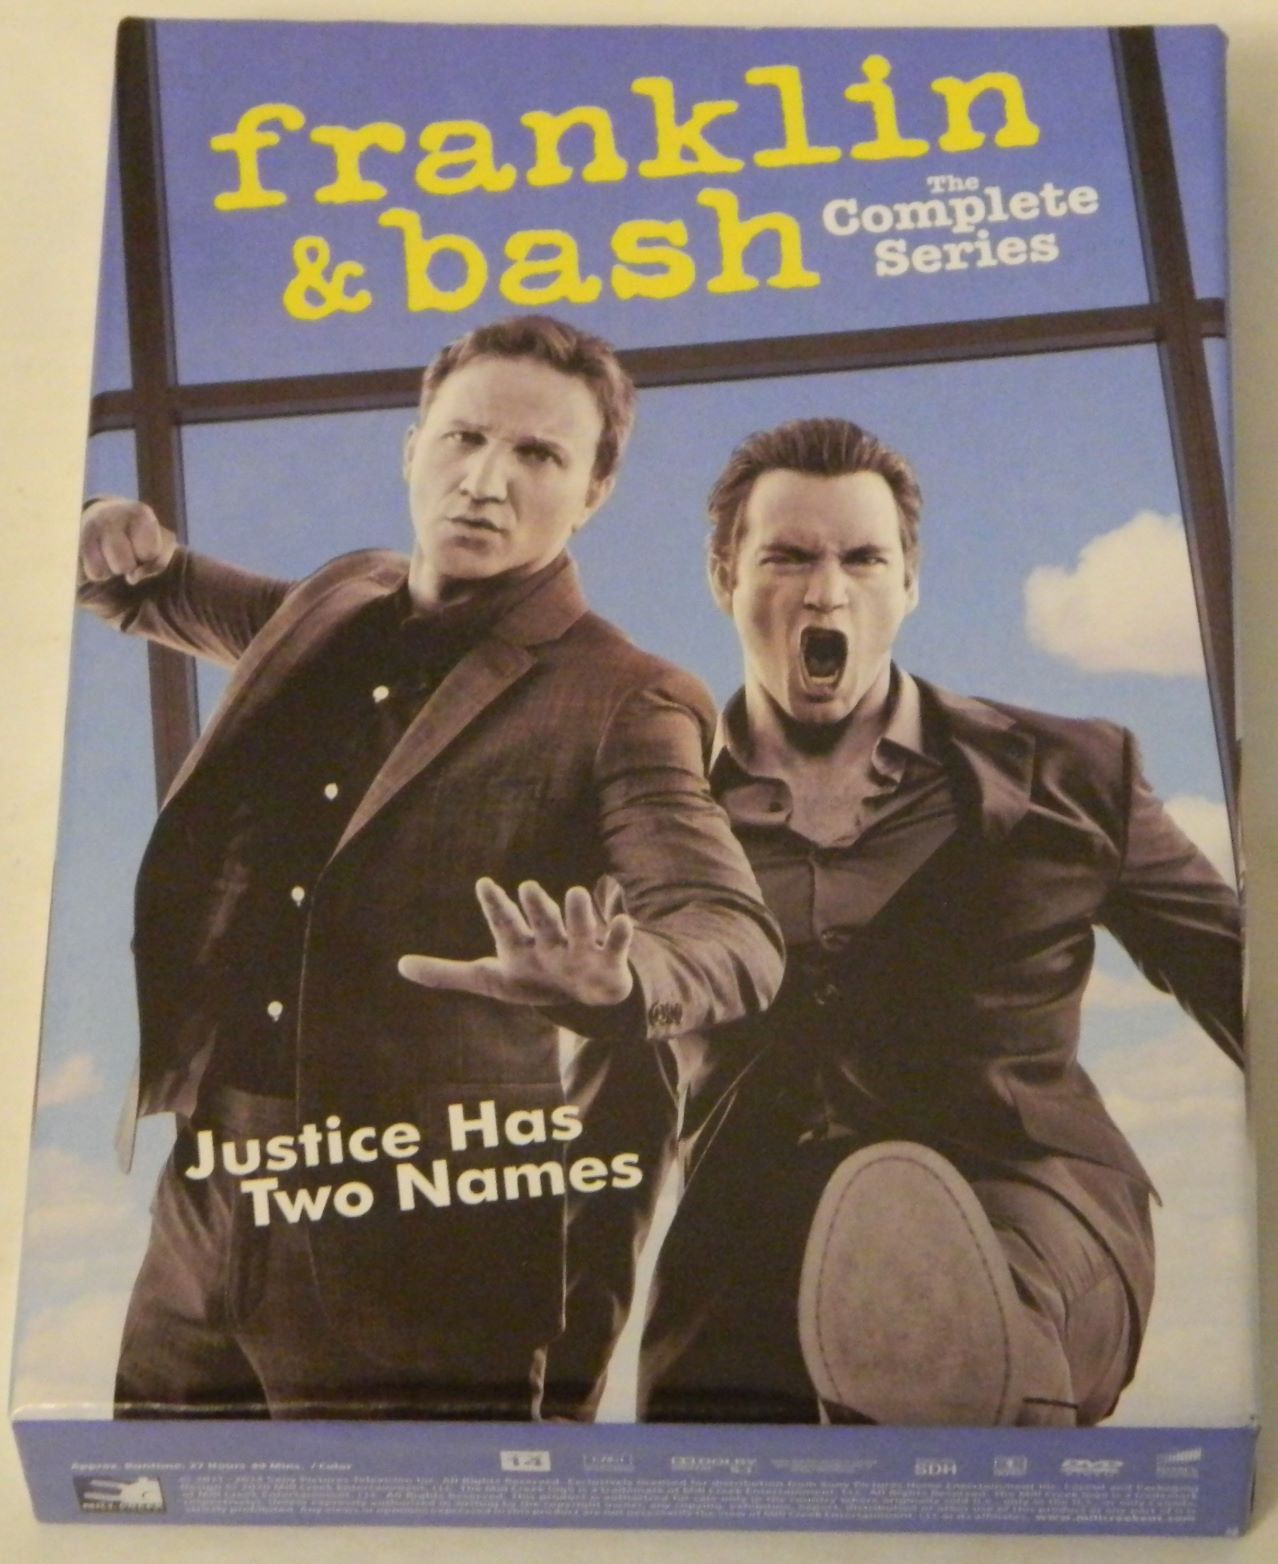 Franklin & Bash: The Complete Series DVD Review